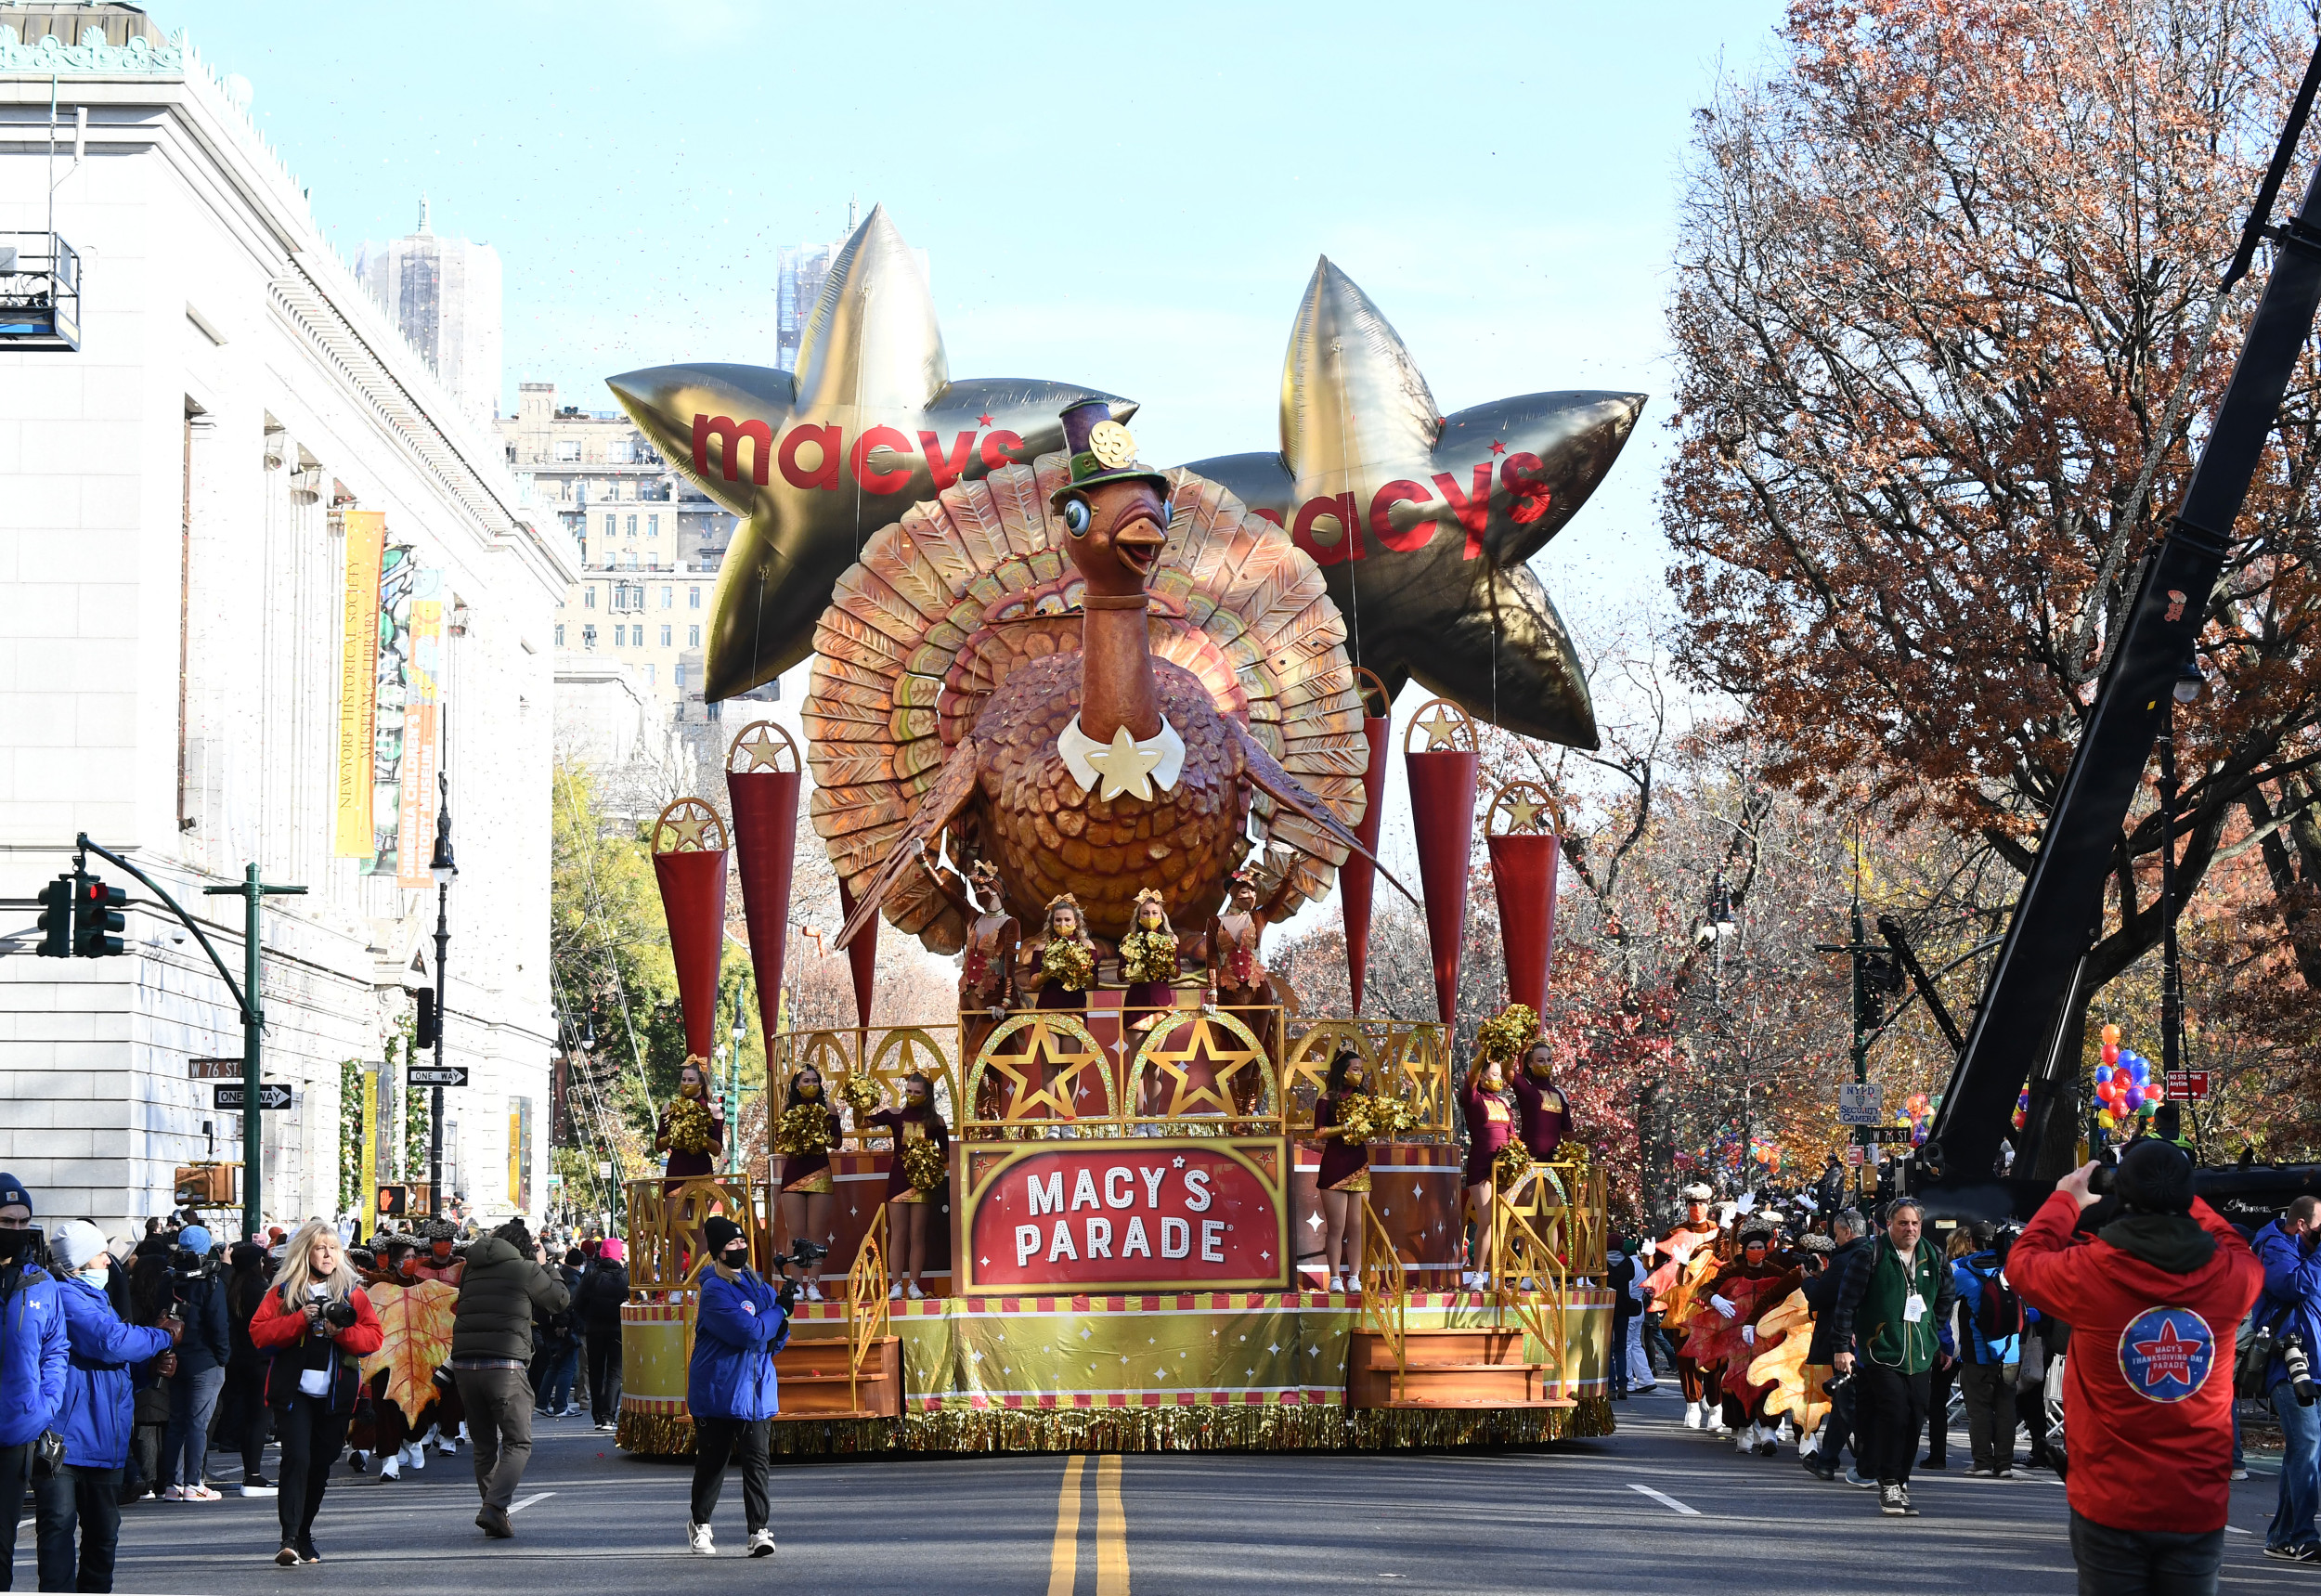 Here's What To Expect At This Year's Macy's Thanksgiving Day Parade